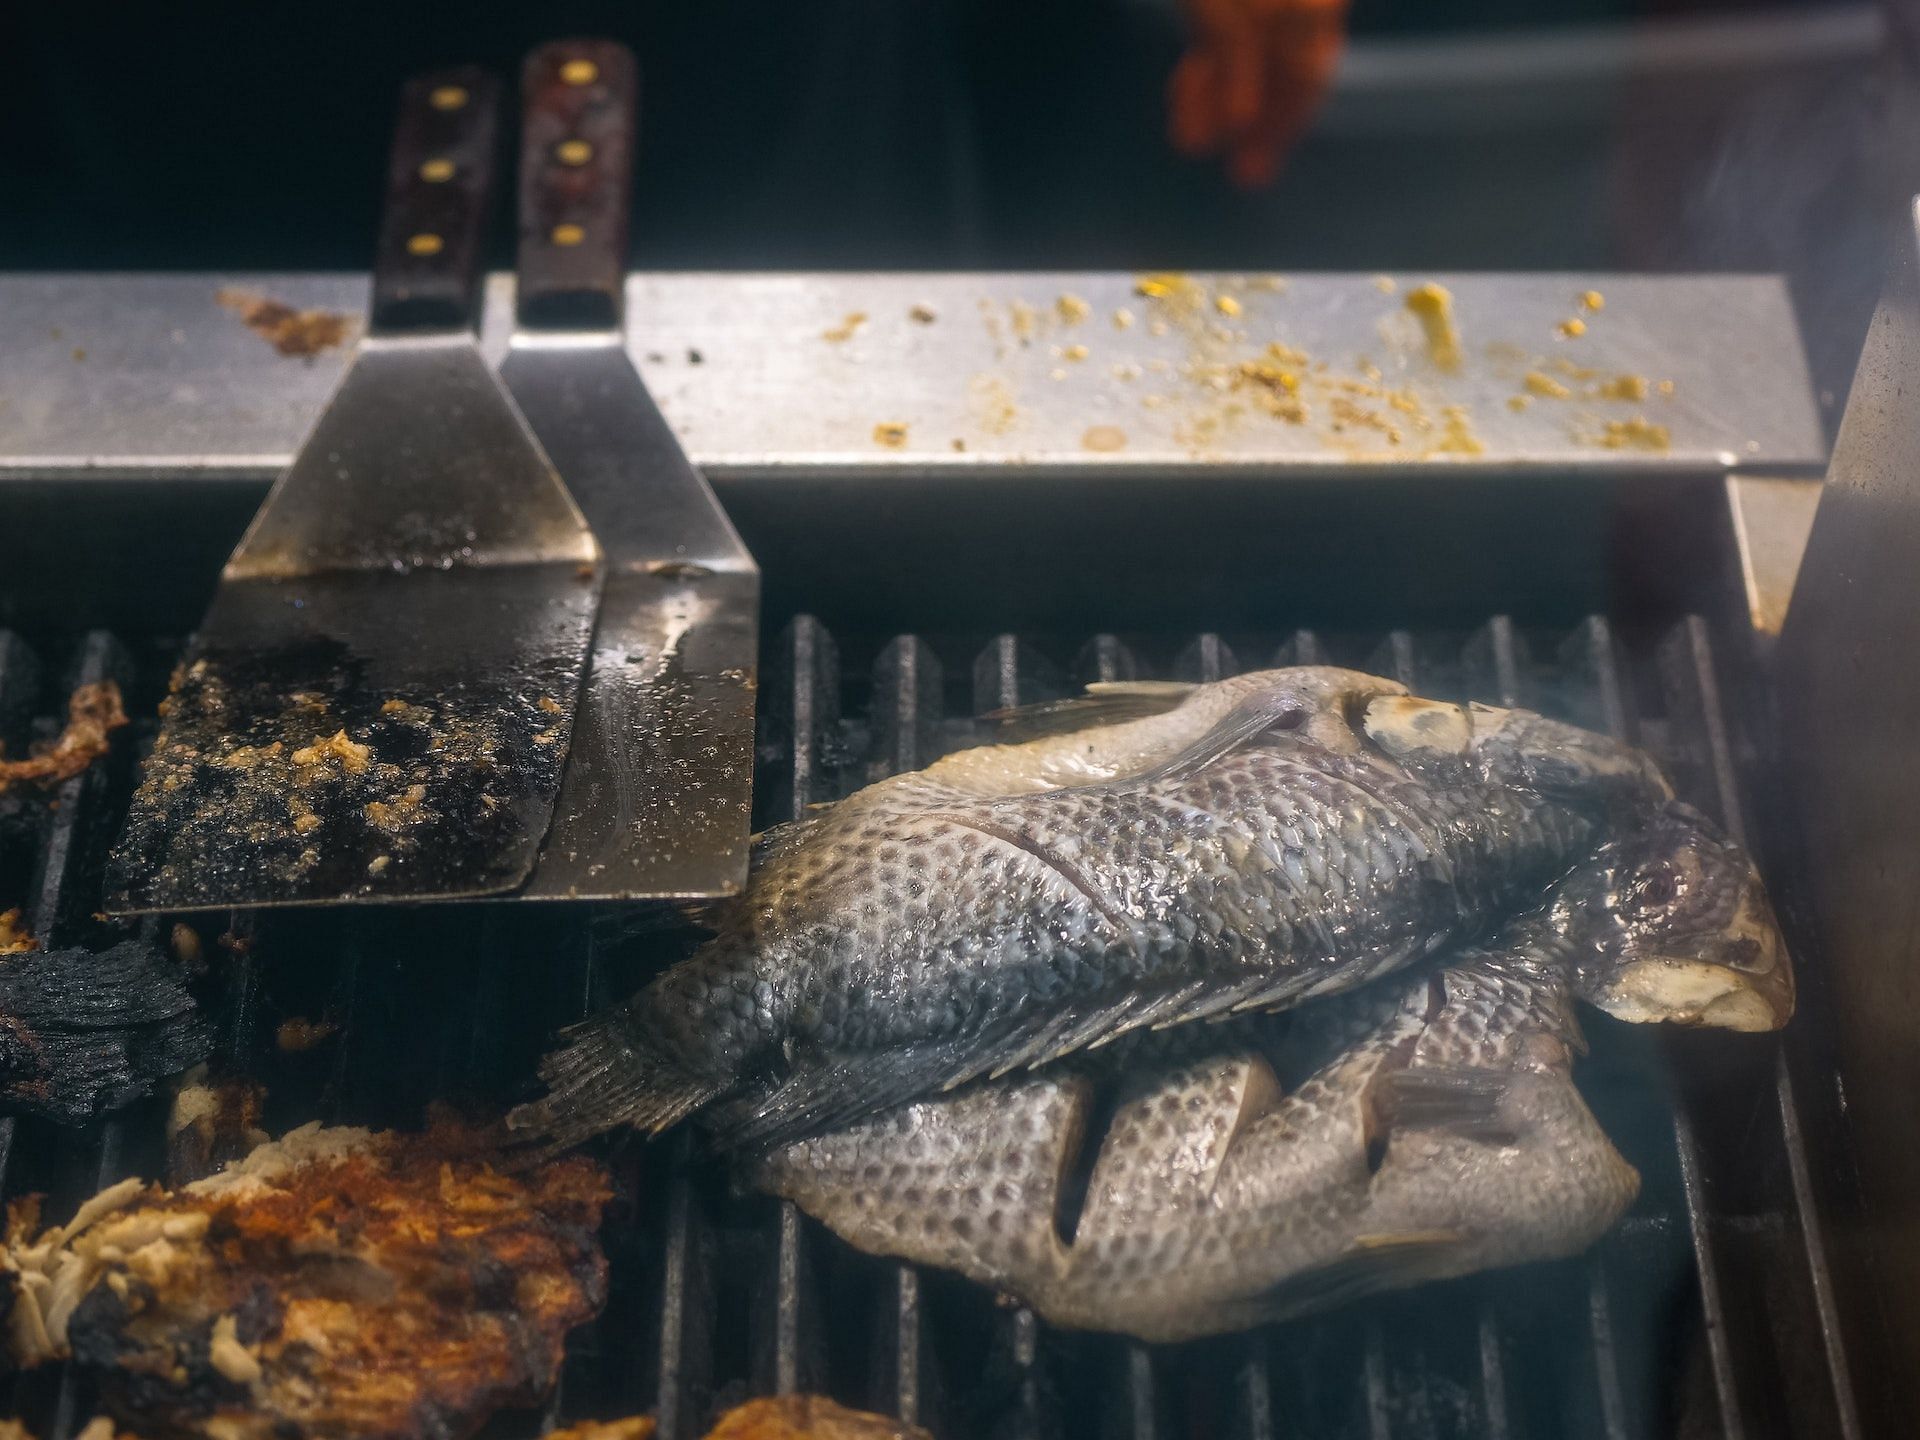 Calories in tilapia depends on whether it is cooked or raw. (Photo via Pexels/Kindel Media)